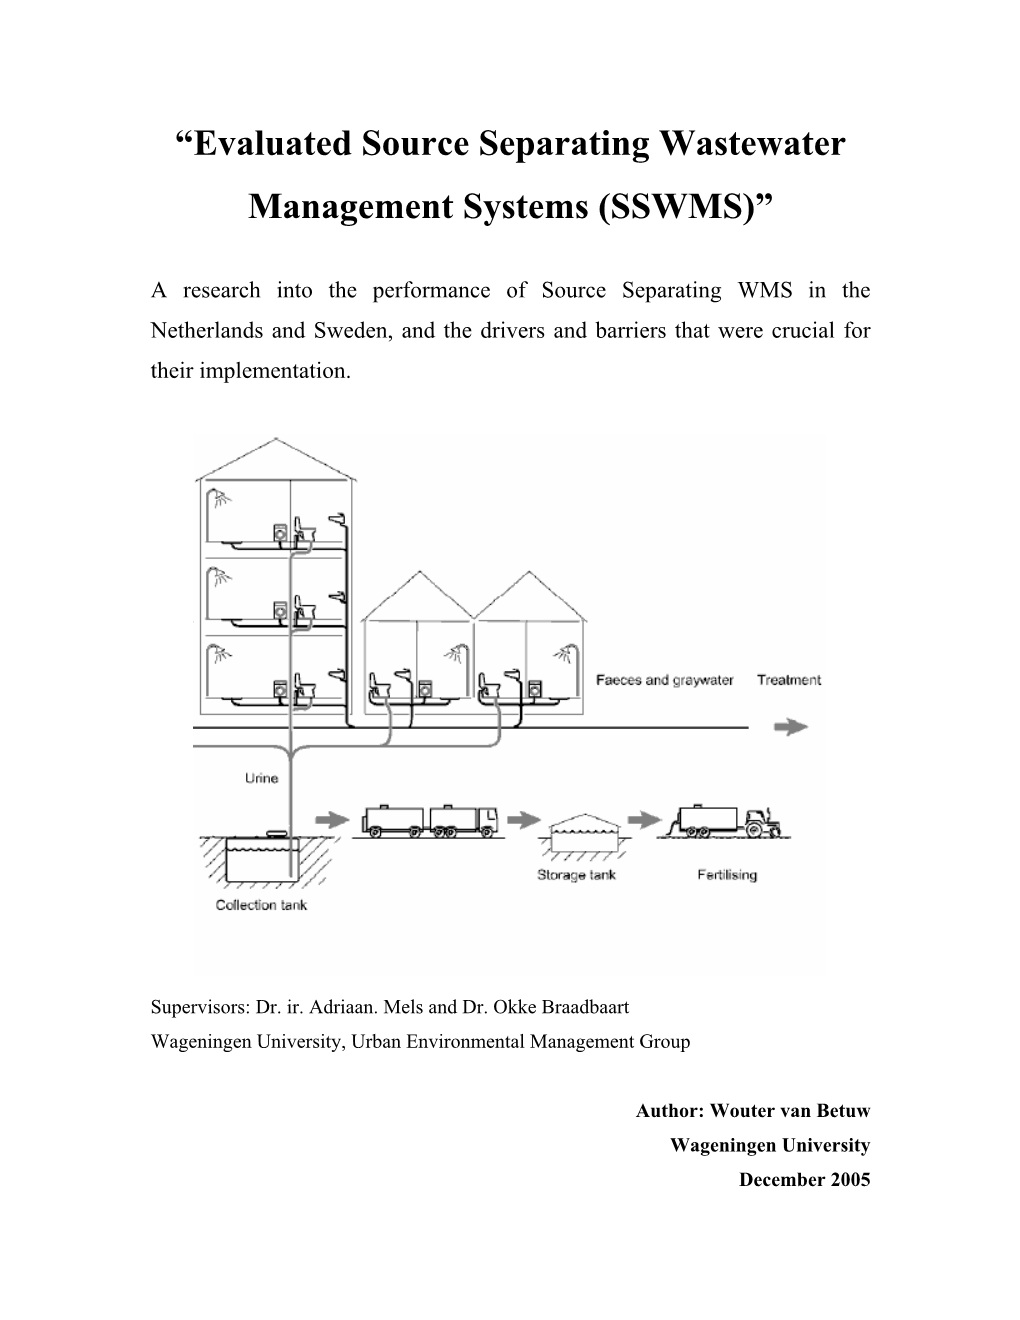 Evaluated Source Separating Wastewater Management Systems (SSWMS)”